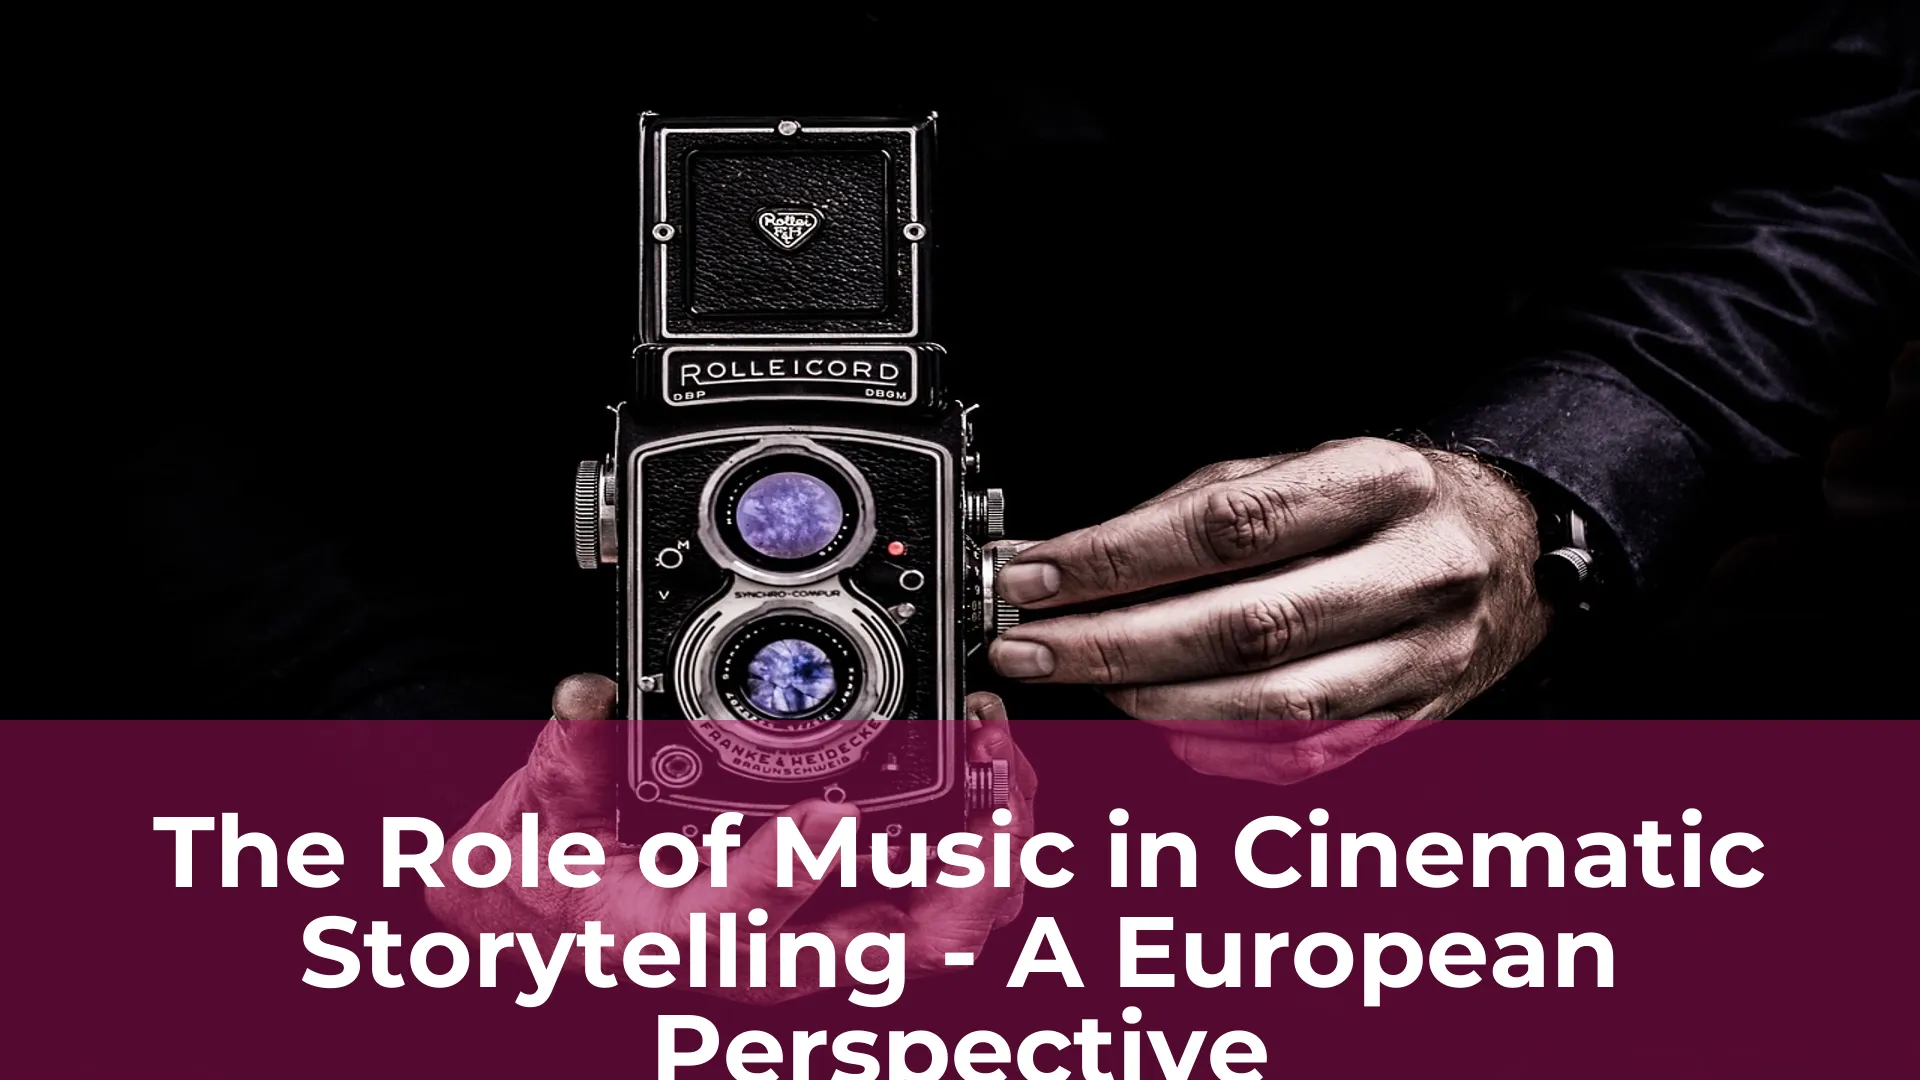 The role of music in cinematic storytelling a european perspective